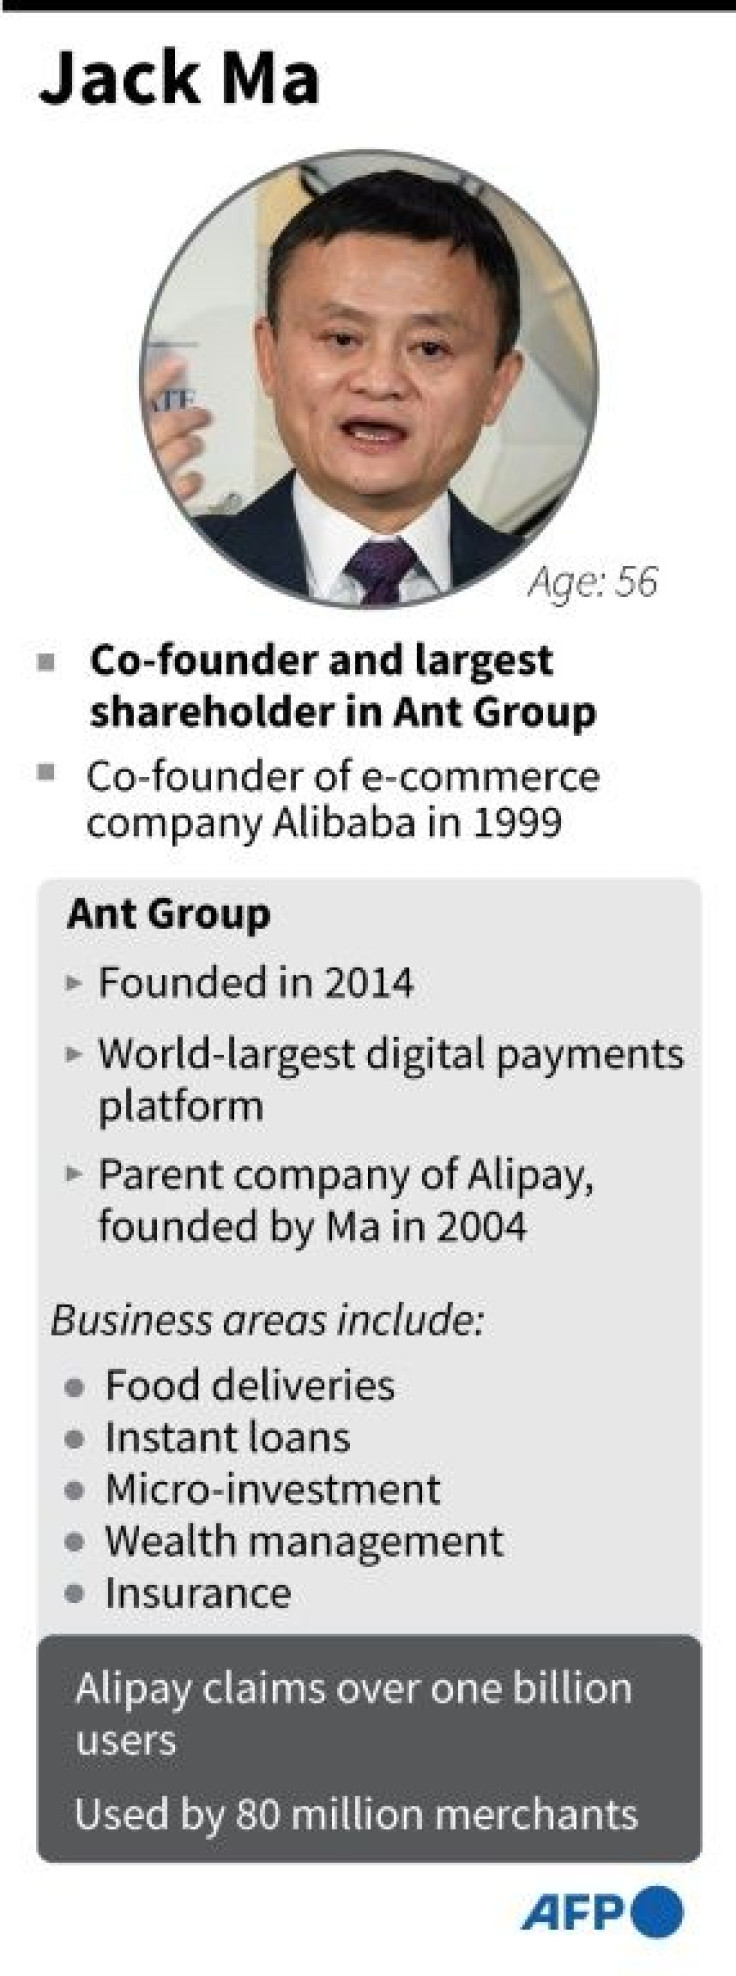 Profile of Jack Ma, Ant Group co-founder.